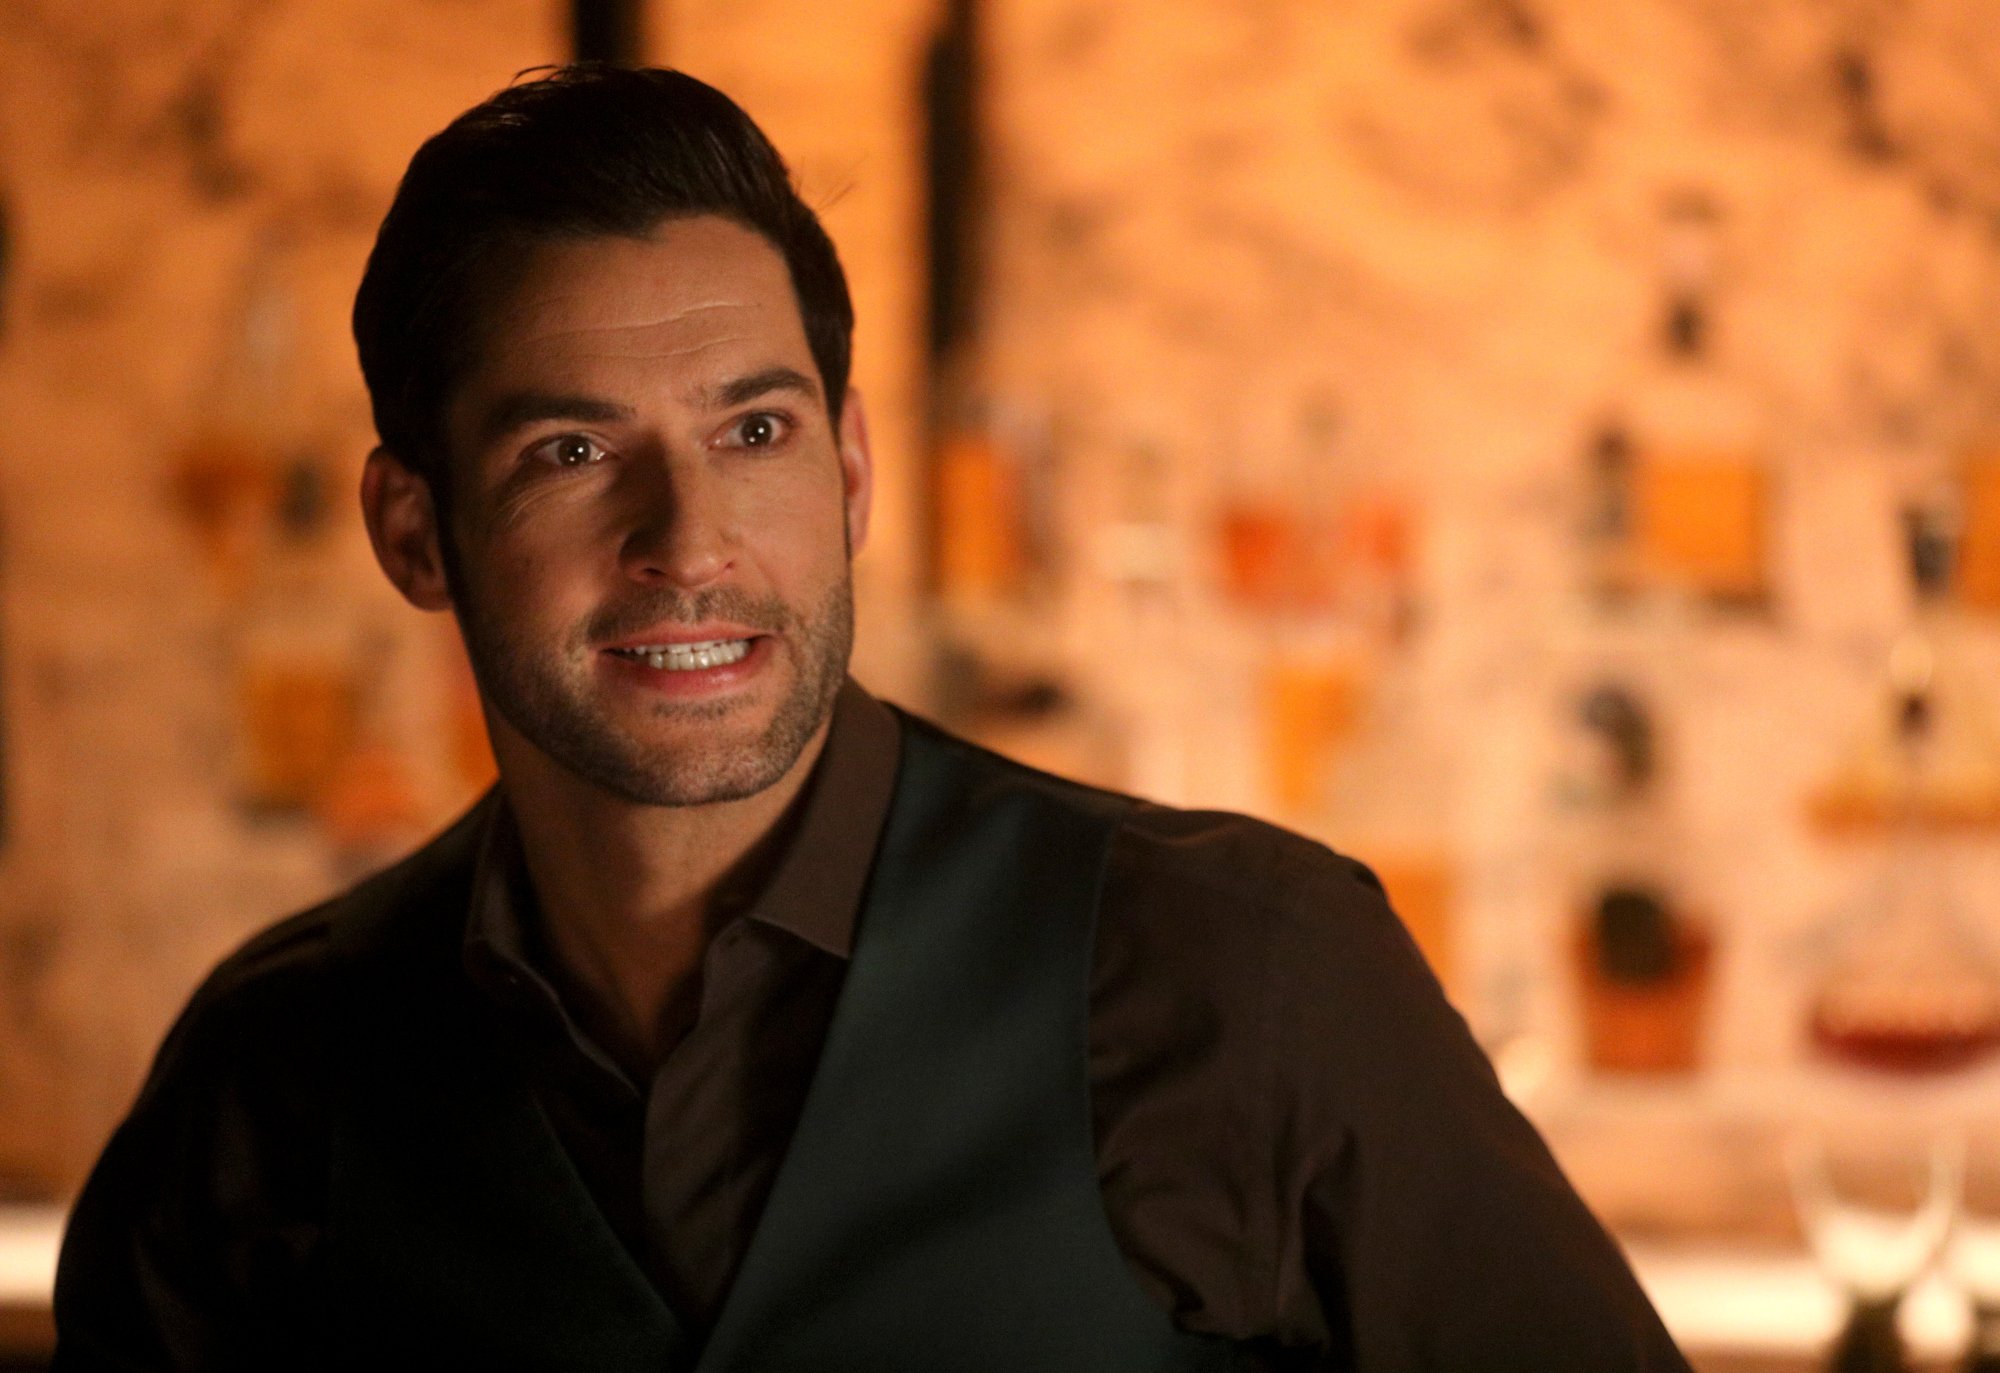 Tom Ellis as Lucifer Morningstar in 'Lucifer.' He's wearing a suit and looks concerned or confused.